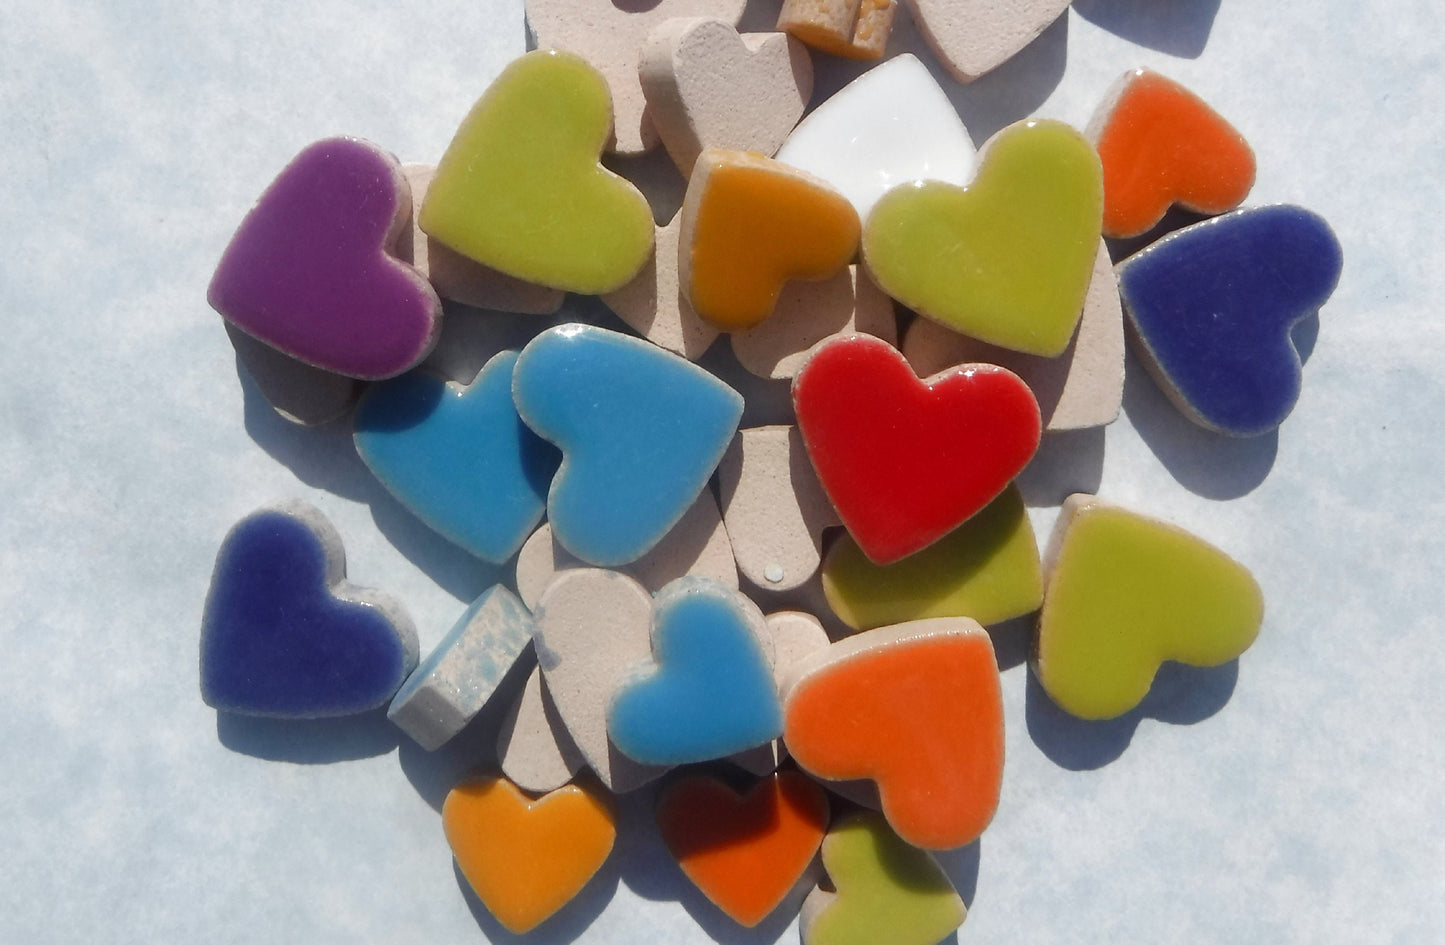 Wild at Heart Mix - Assorted Colors of Ceramic Heart Mosaic Tiles - 50g